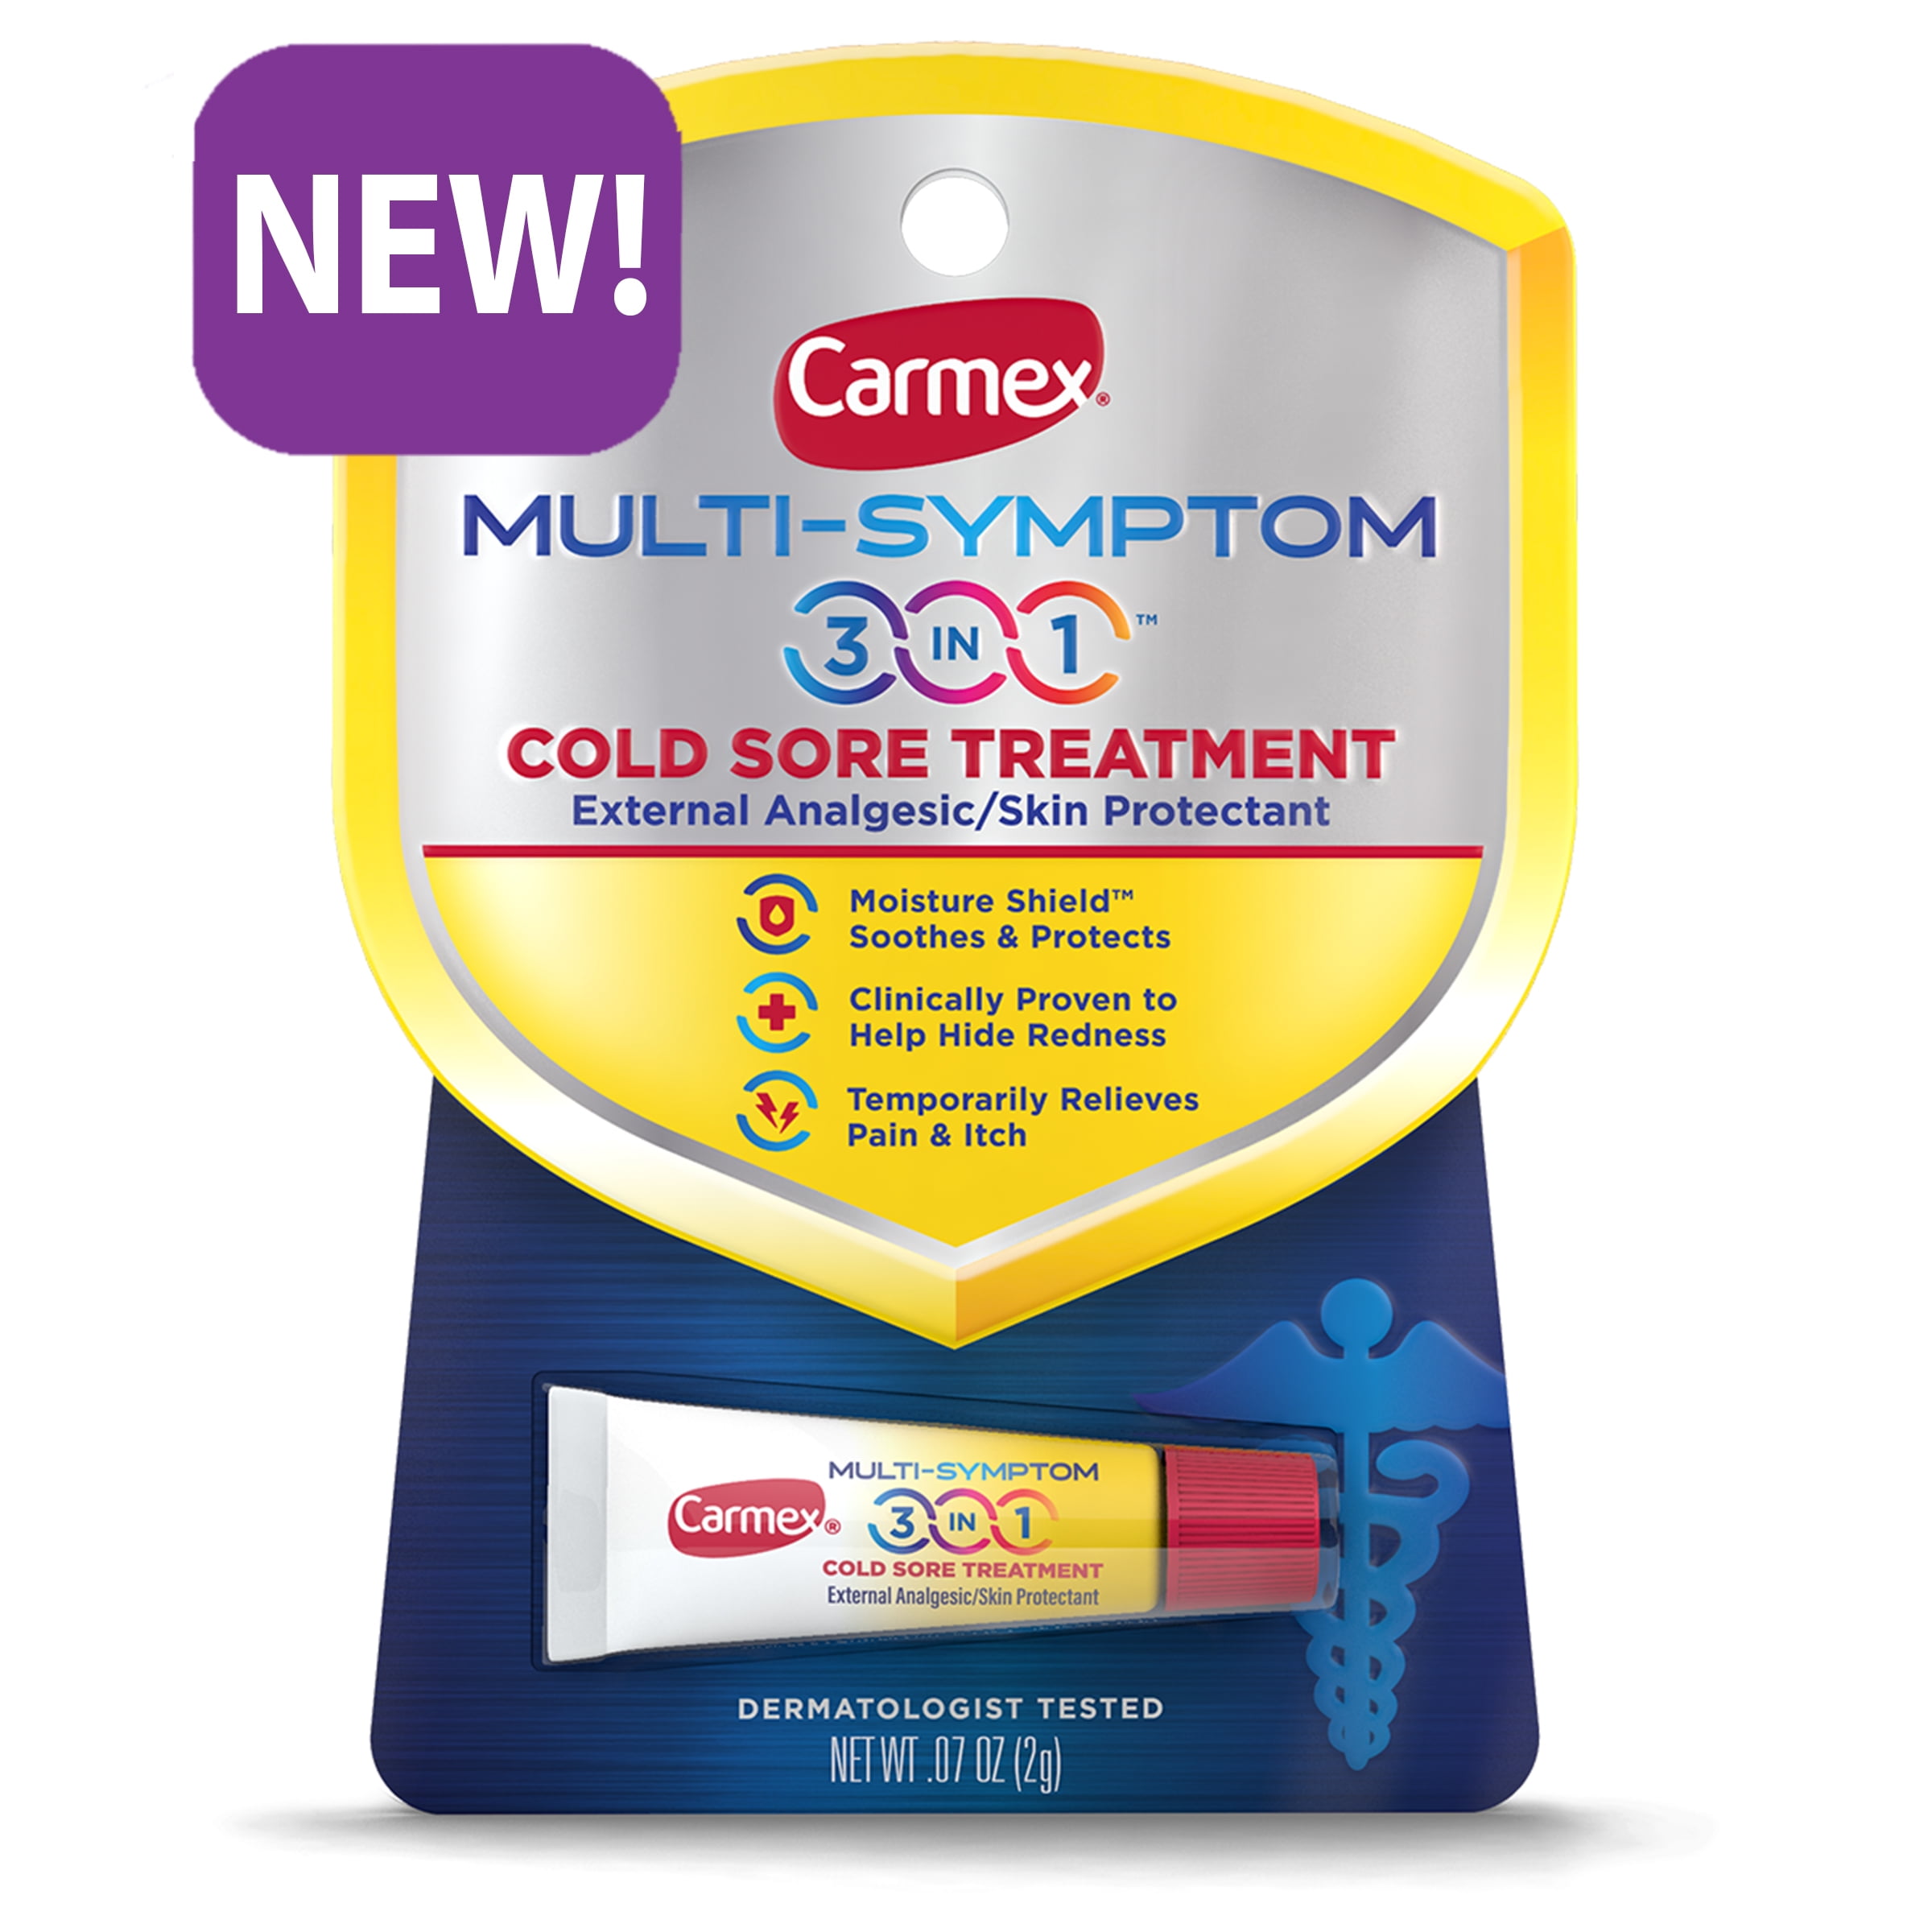 is carmex good for cold sores